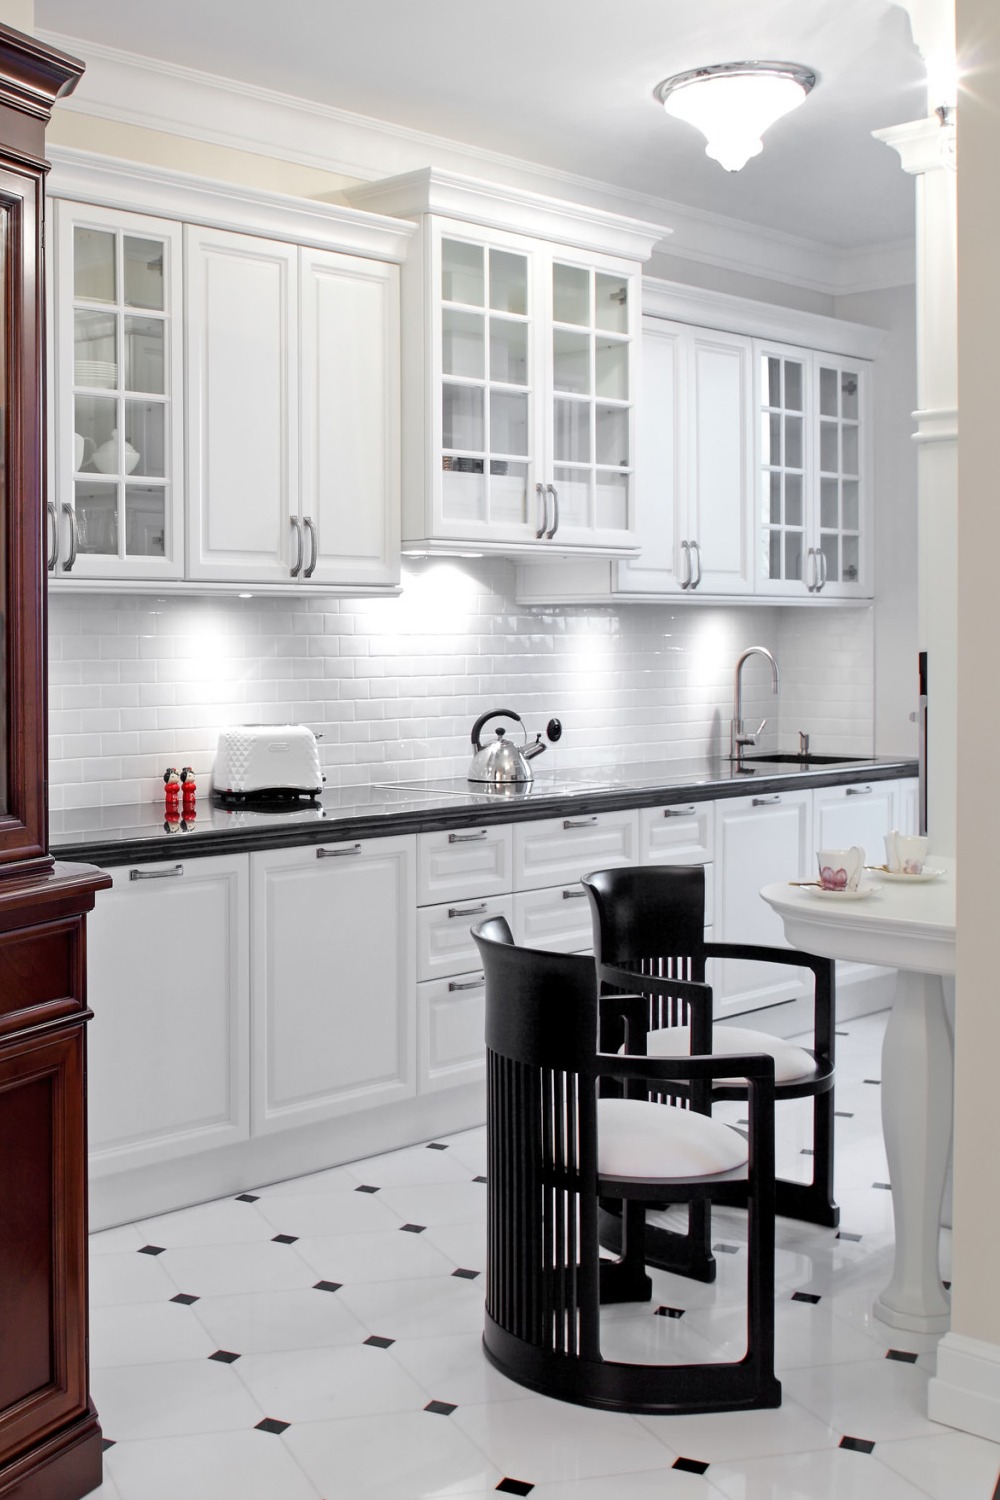 Black Countertops White Cabinets Black And White Combination Glossy White Tiles White Subway Tiles Beach Style Light Gray Kitchen With White Cabinets With Black